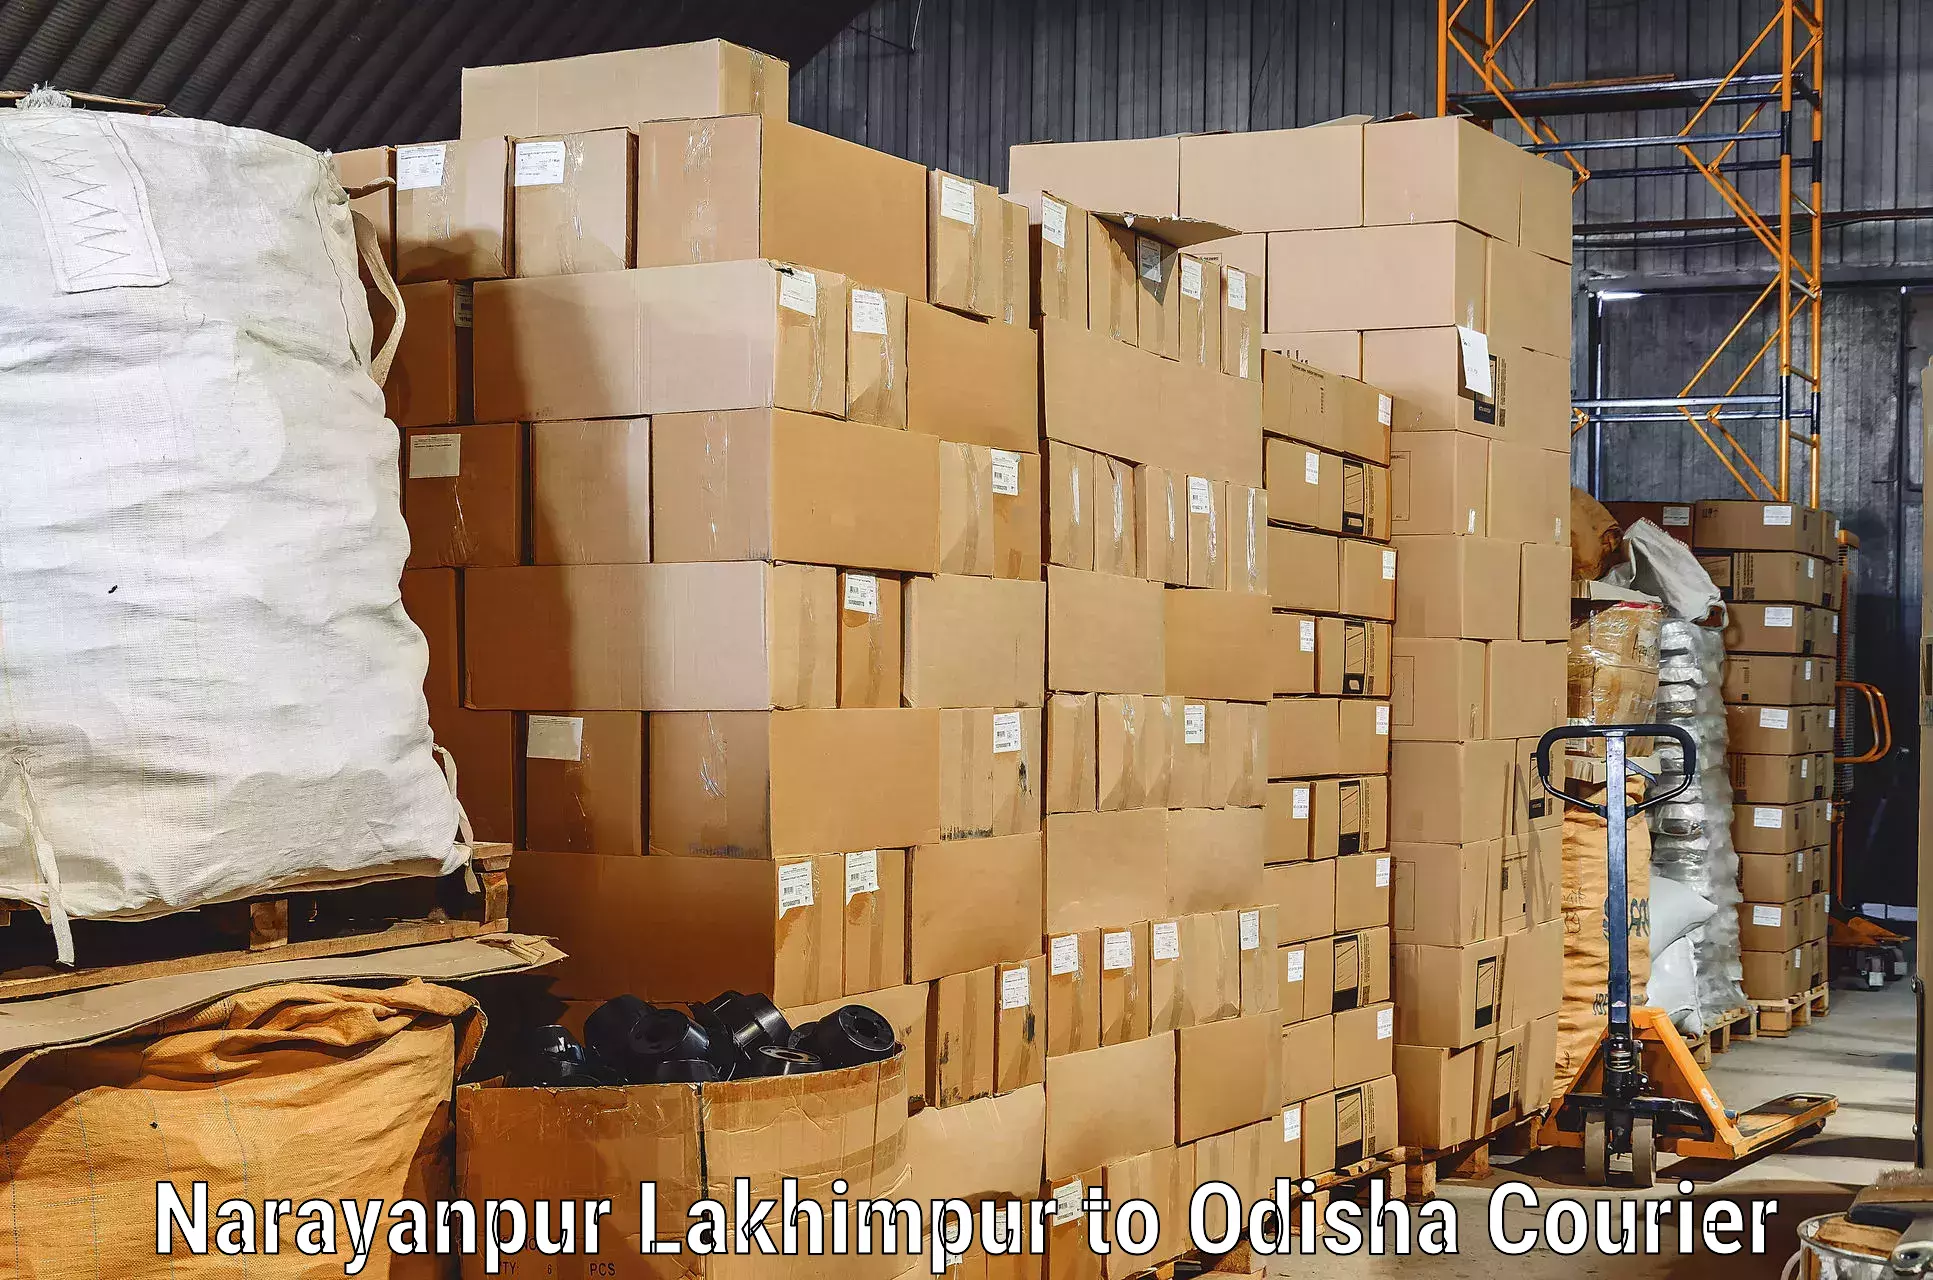 Trusted relocation services Narayanpur Lakhimpur to Binjharpur